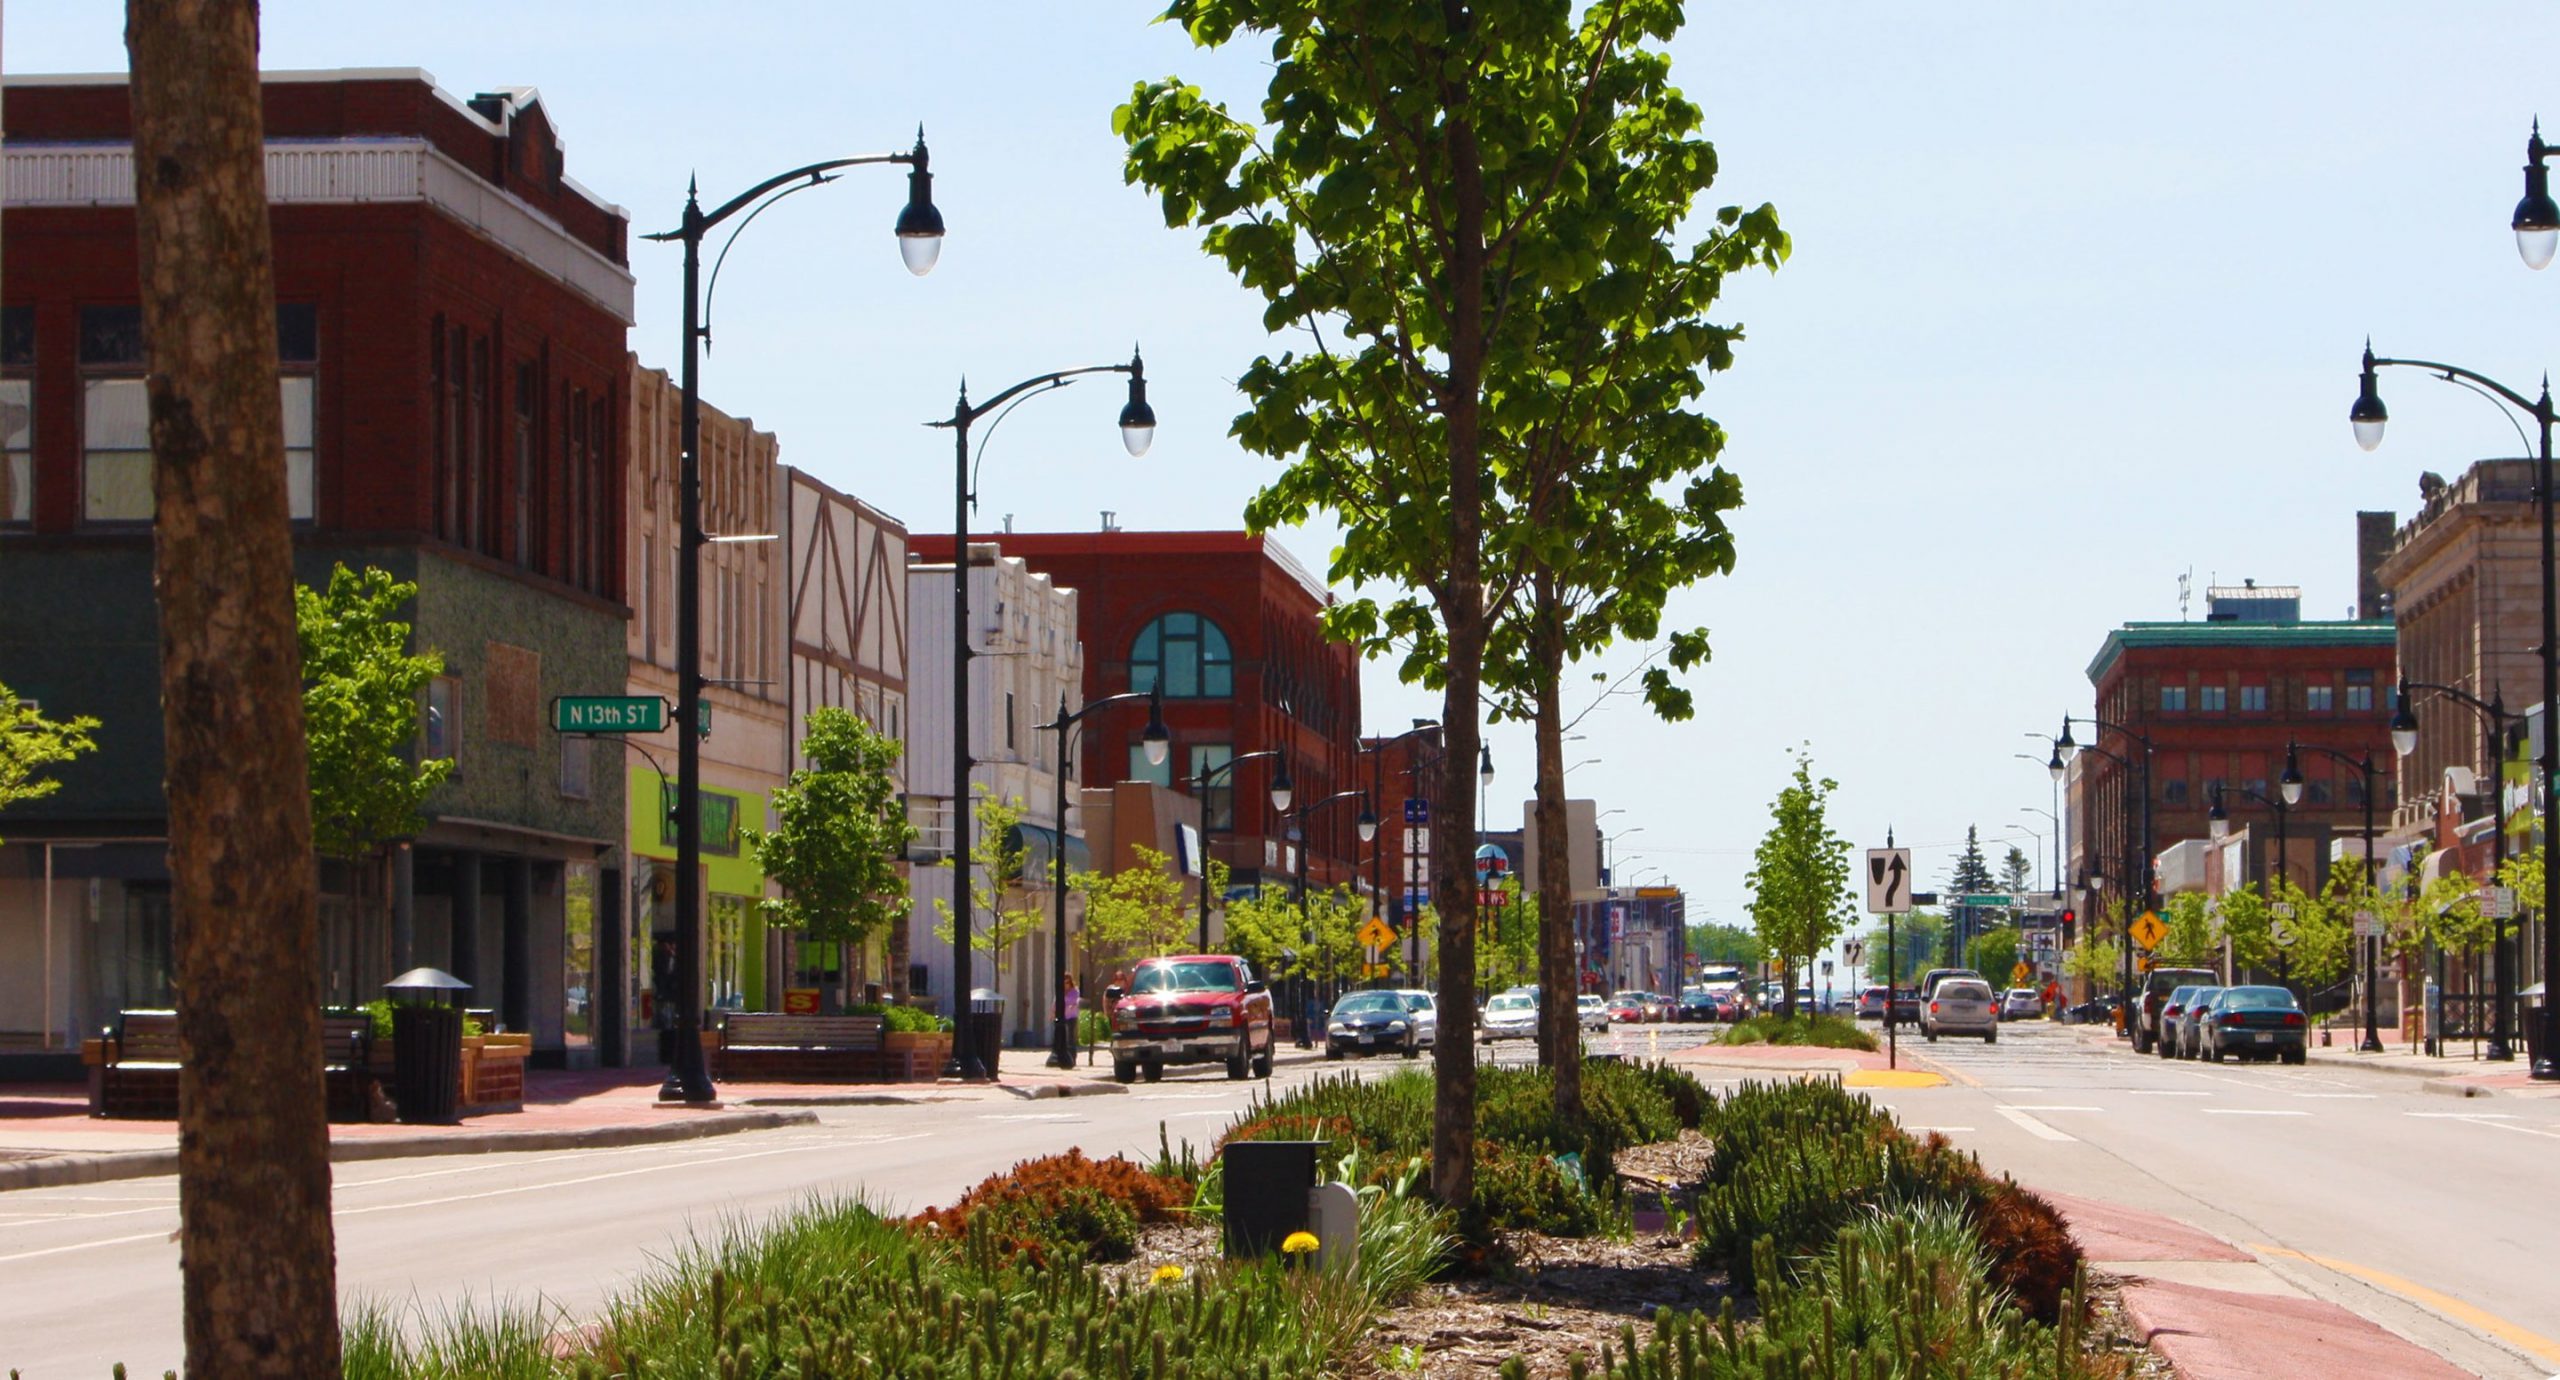 A vibrant row of buildings in the daytime of downtown Superior. There are trees in the middle and lightpoles lining the street.